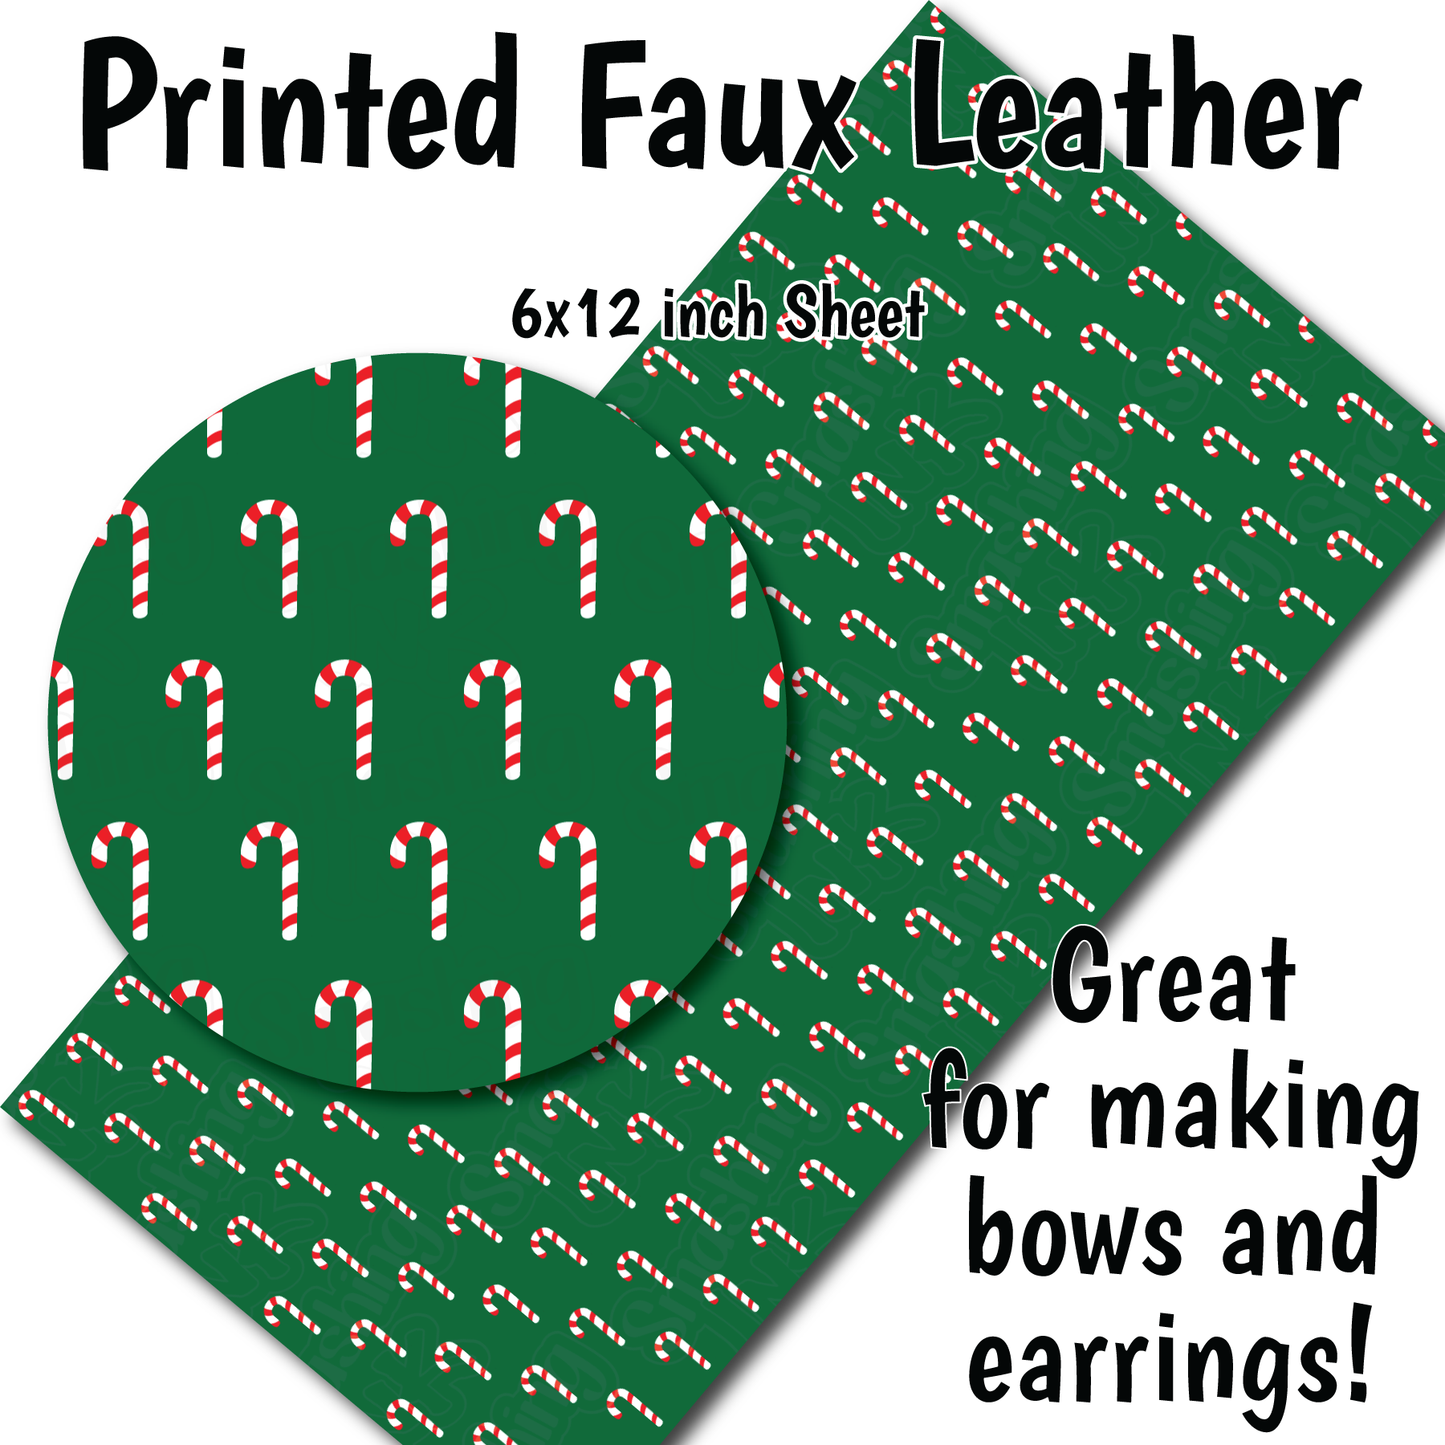 Candy Canes M - Faux Leather Sheet (SHIPS IN 3 BUS DAYS)